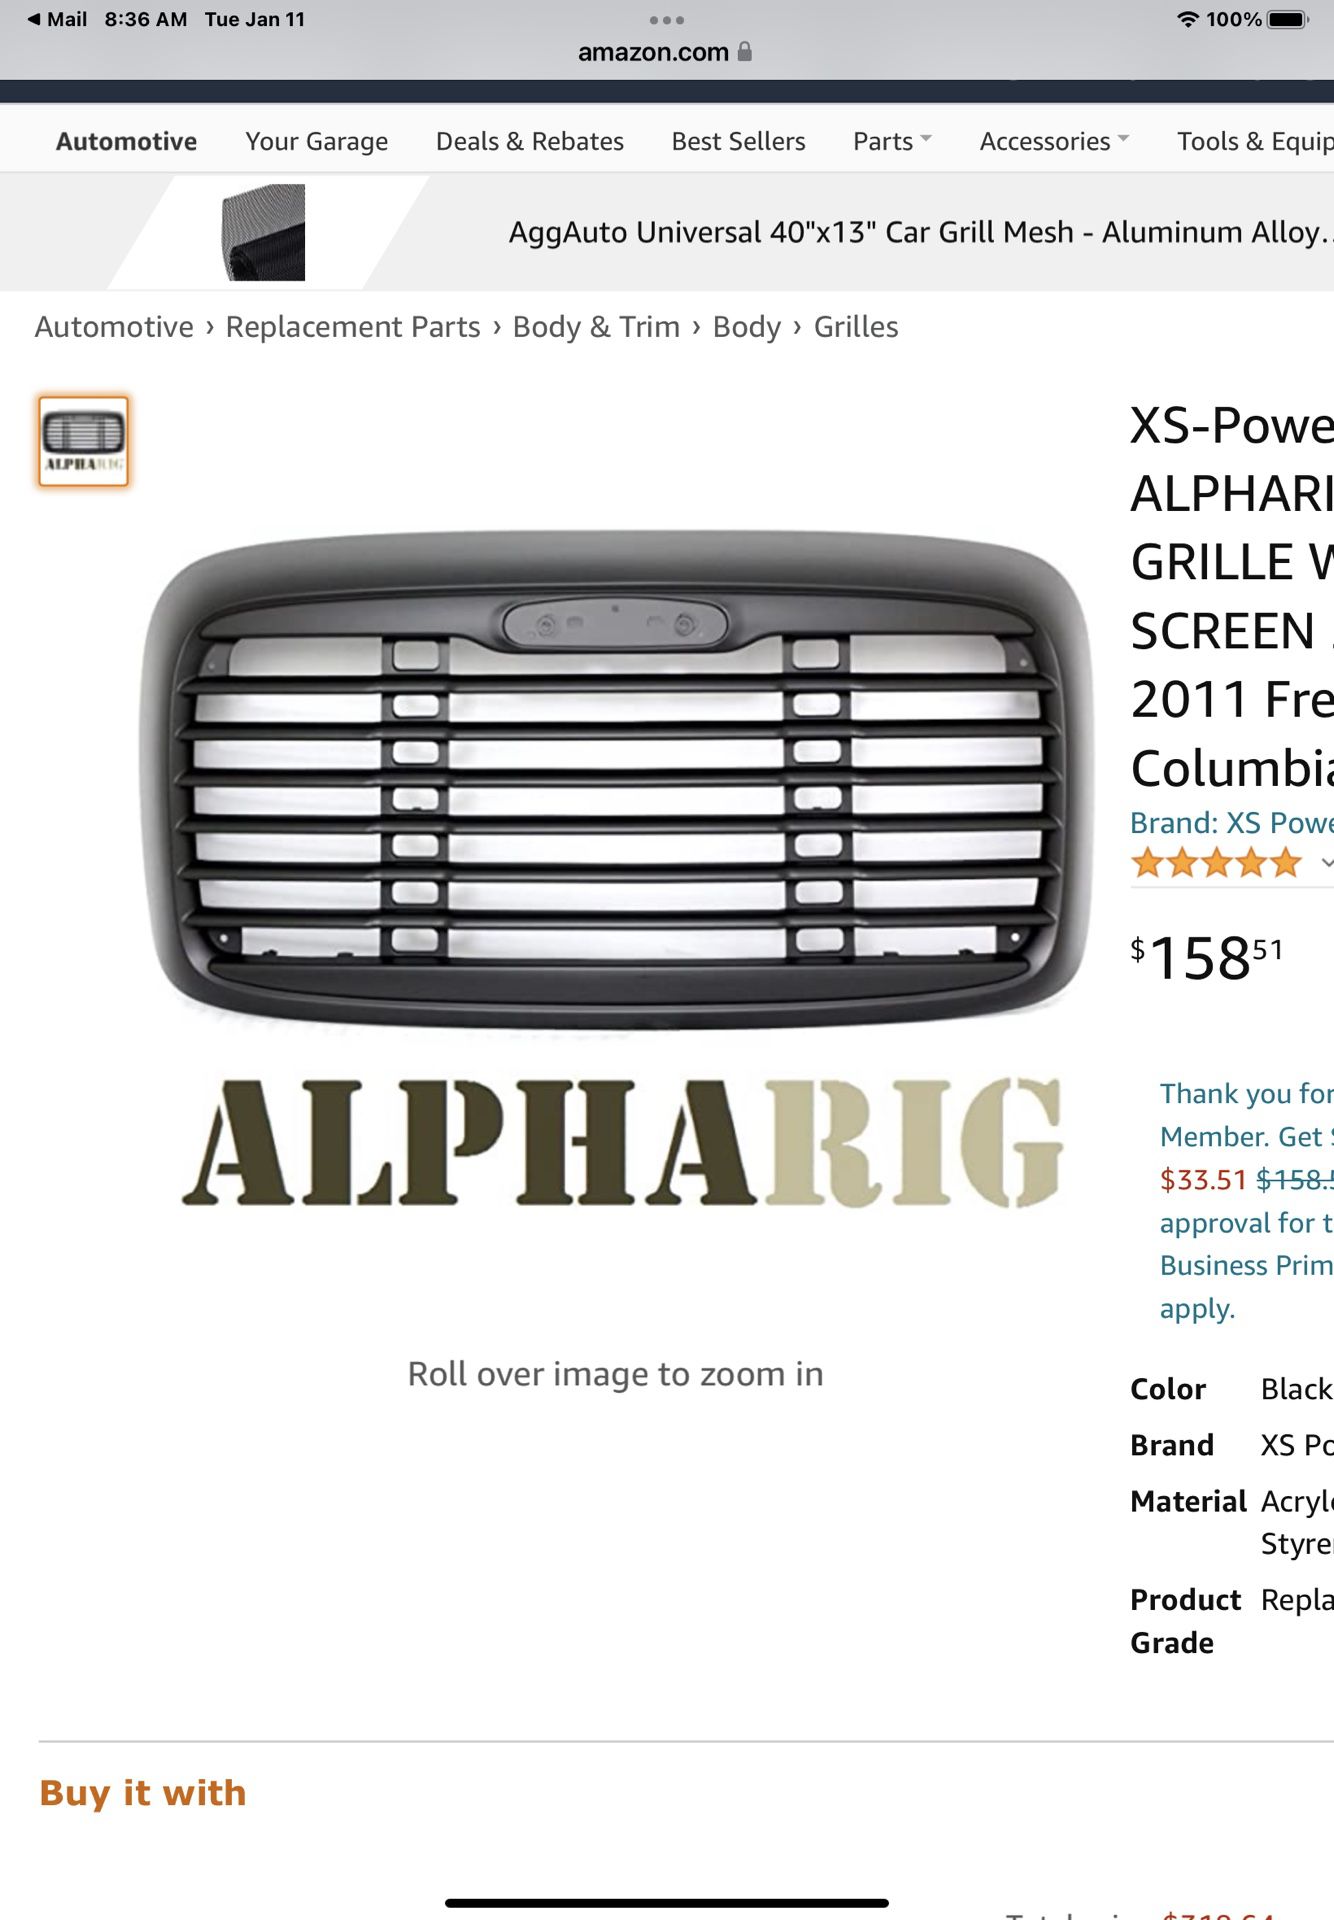 XS-Power ALPHARIG BLACK GRILLE BUG SCREEN 2000-2011 Freightliner Columbia Semi Grill